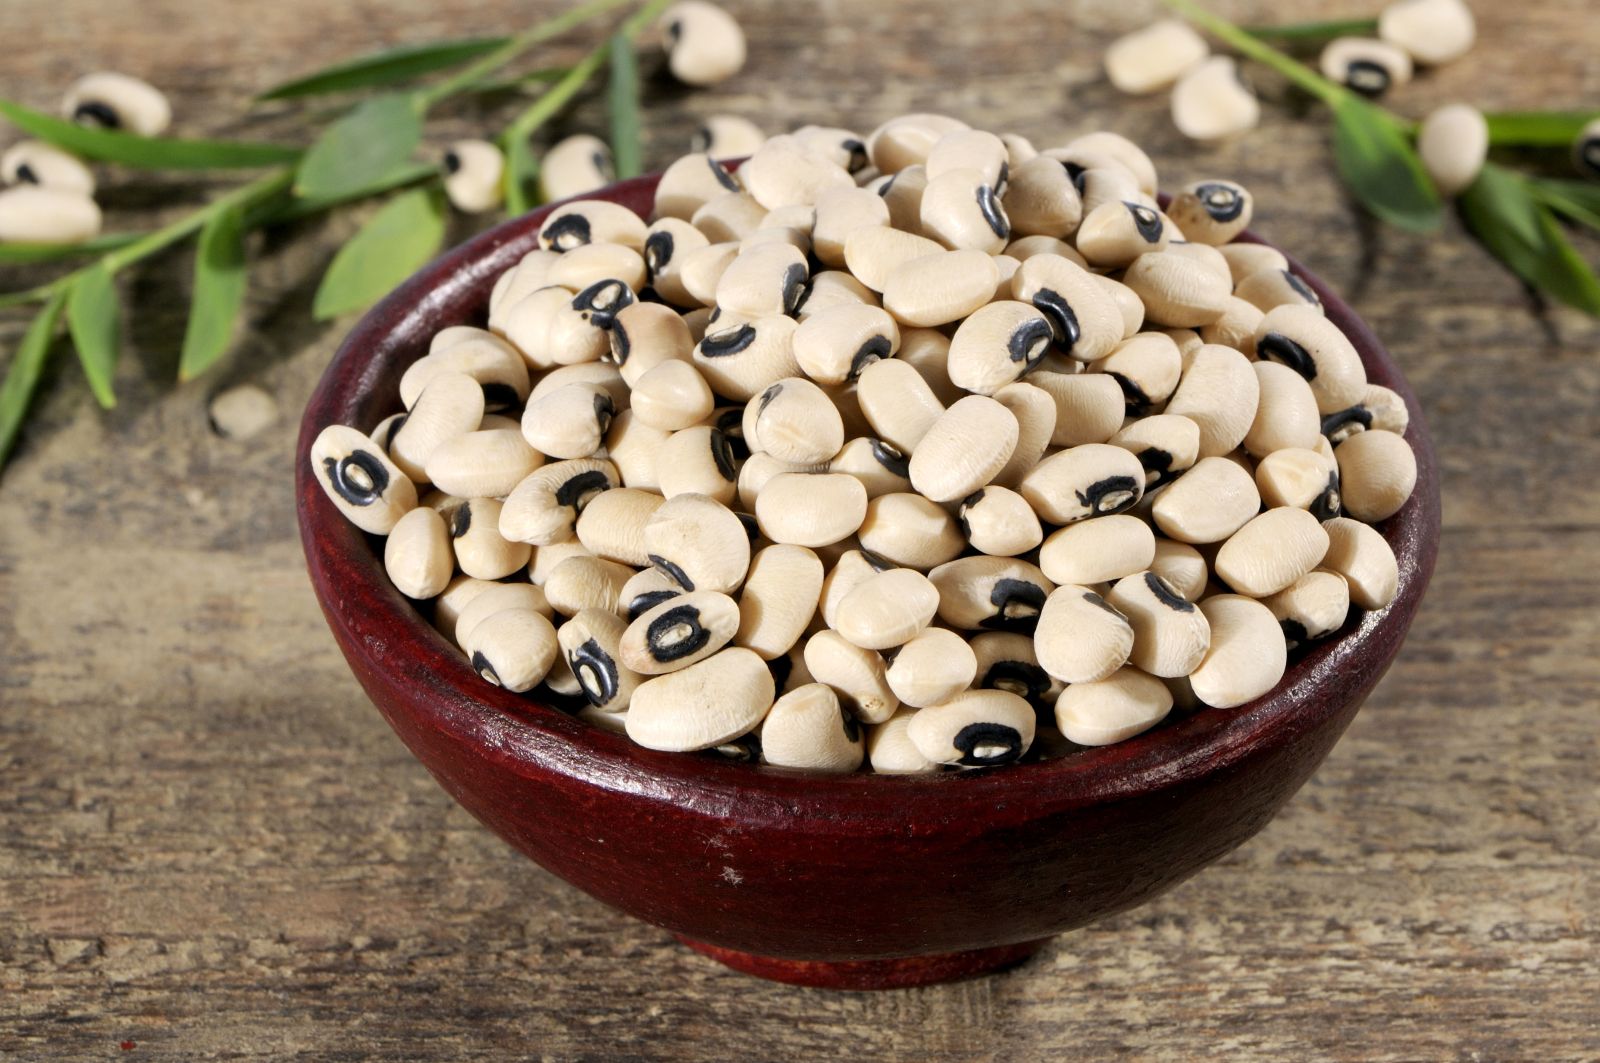 Genetically modified black-eyed peas will soon be cultivated in Burkina Faso.